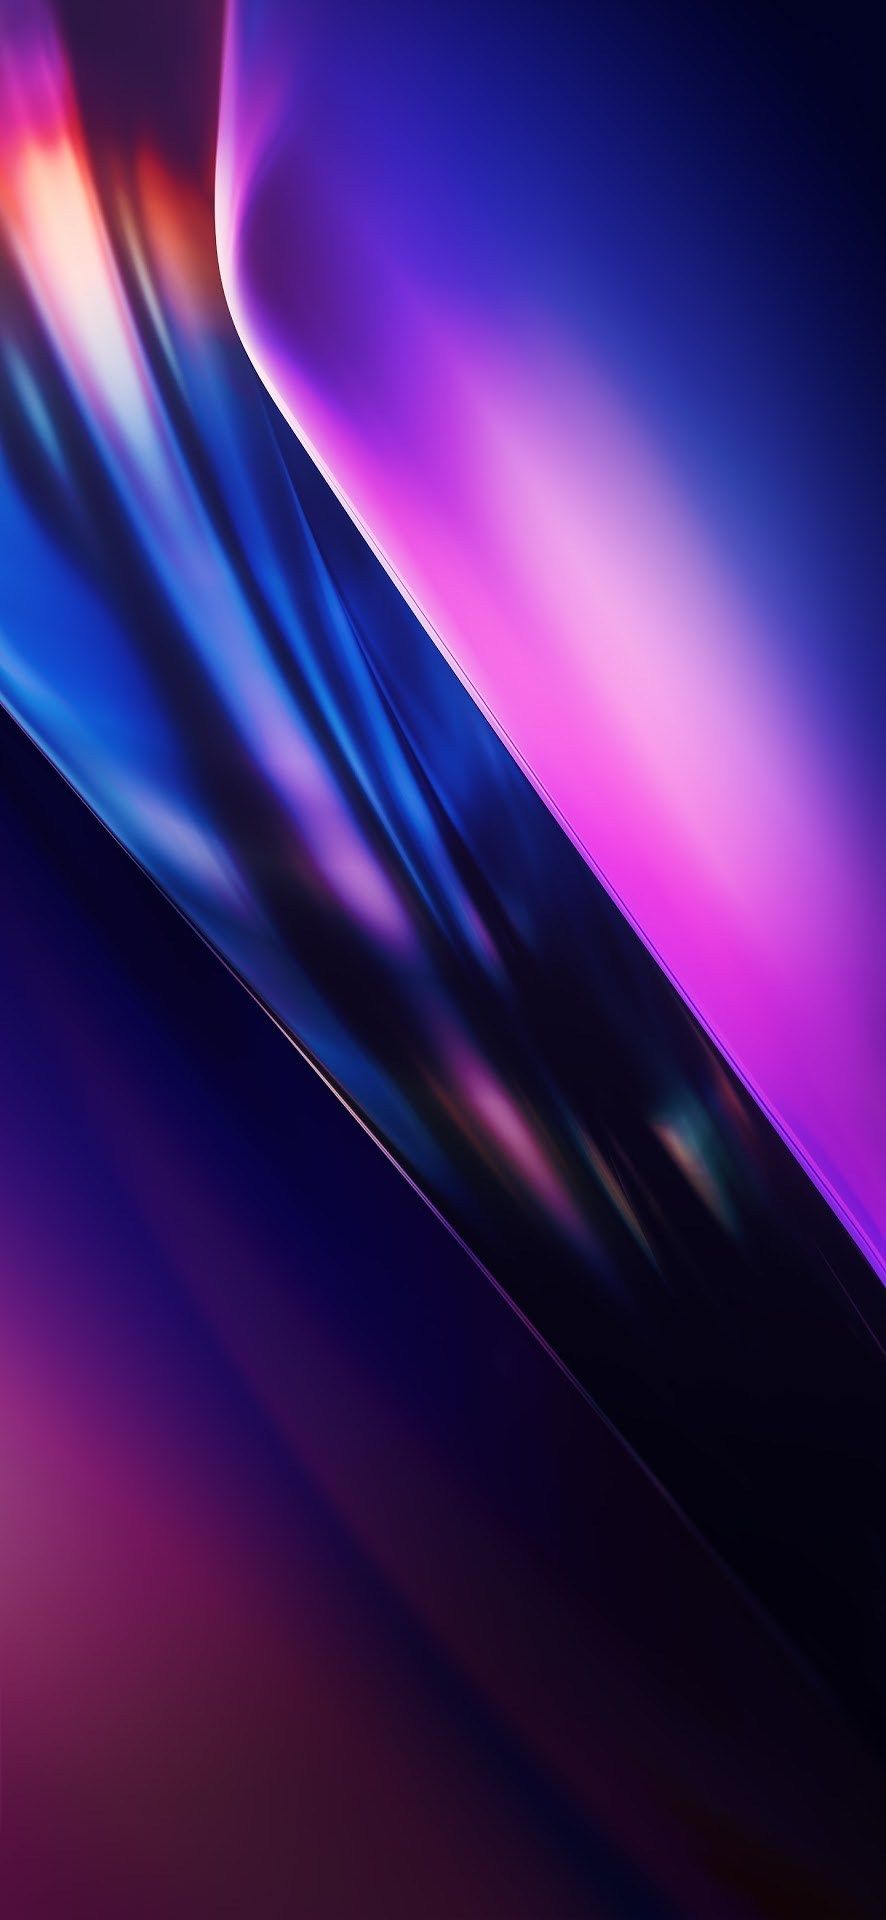 Download OnePlus 8 Wallpaper in 4K and Ultra HD Resolution